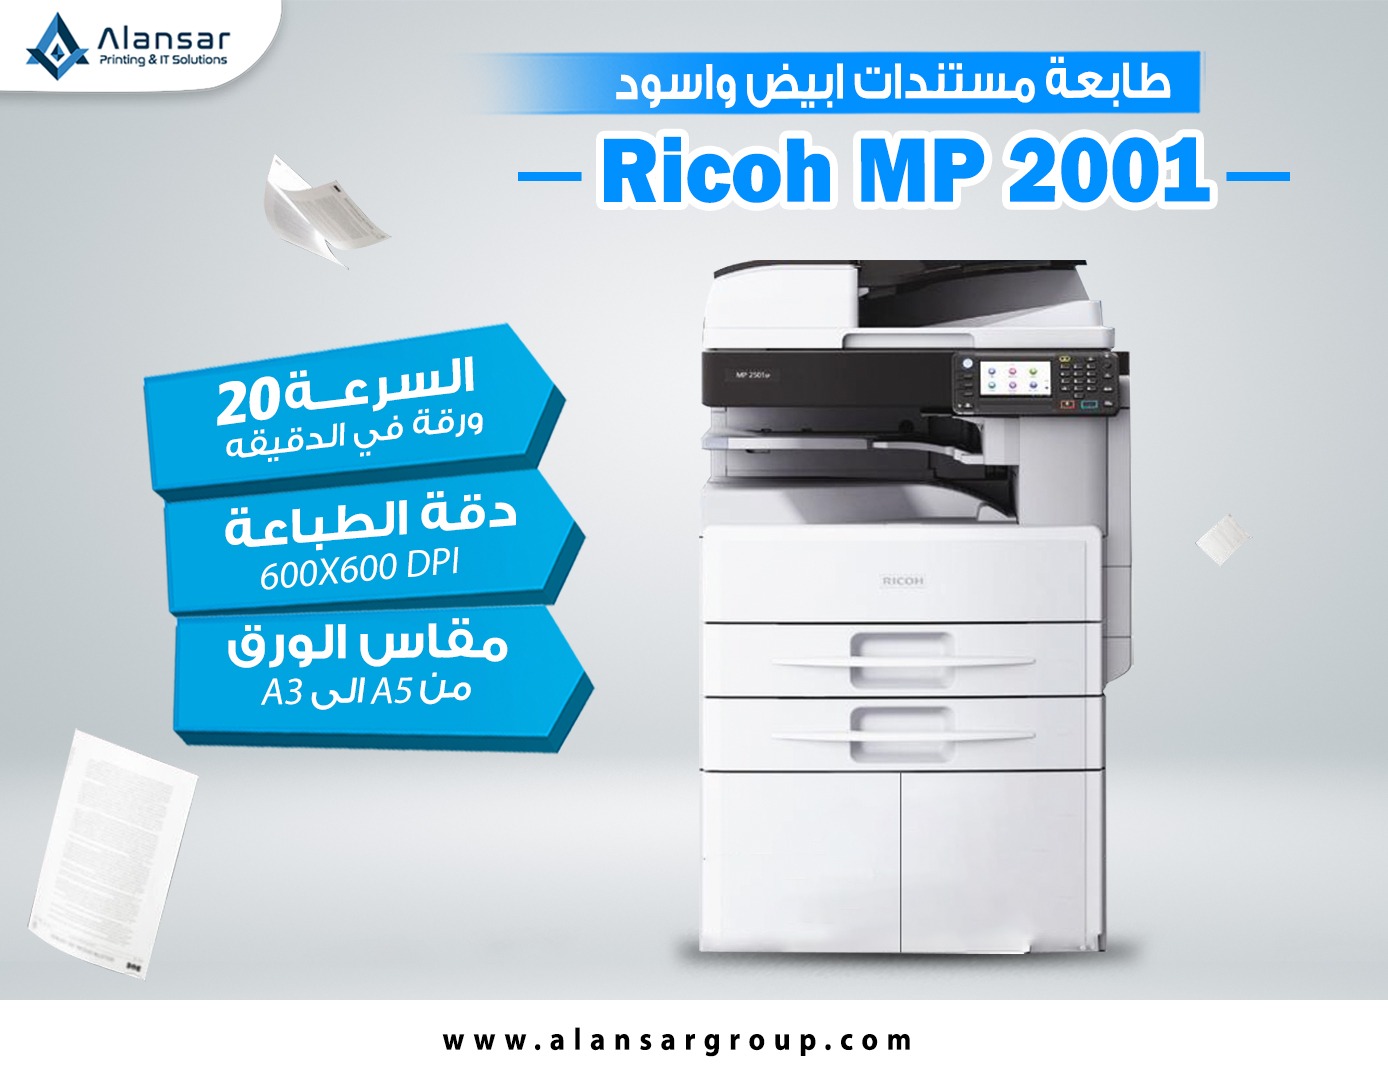 Your office needs are now complete with the distinctive printer: Ricoh MP 2001